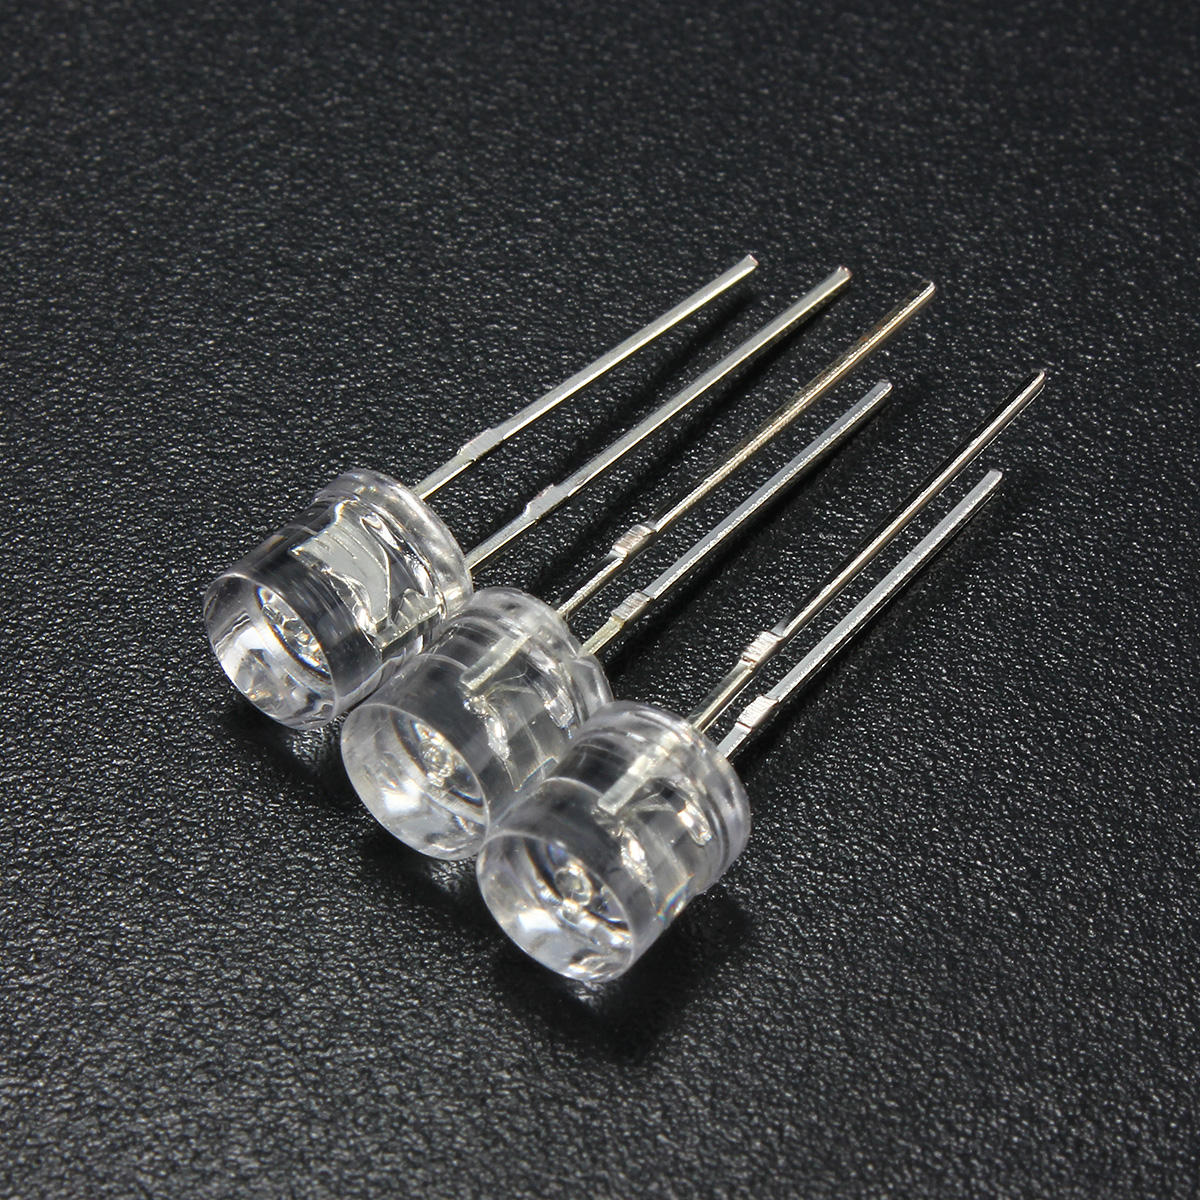 10pcs-5mm-5-Color-Water-Clear-Flat-LED-Diodes-Assortment-DIY-Light-1076710